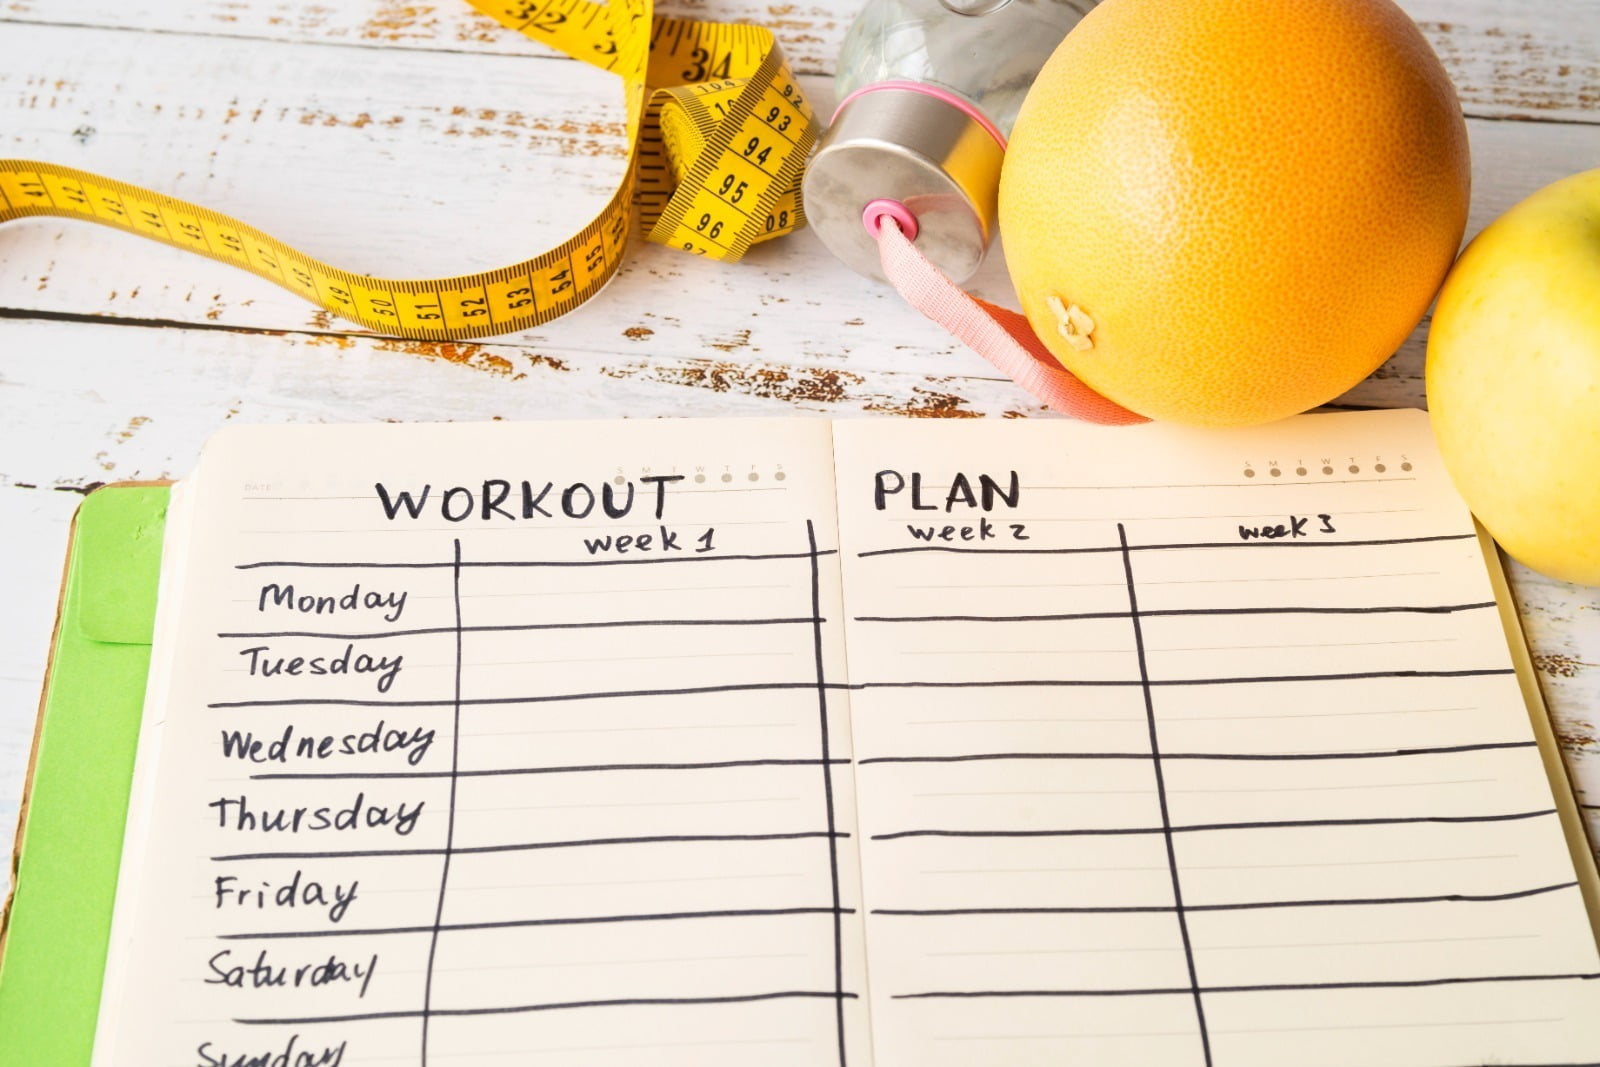 Your Weekly Fitness Plan If You Want To Lose Weight